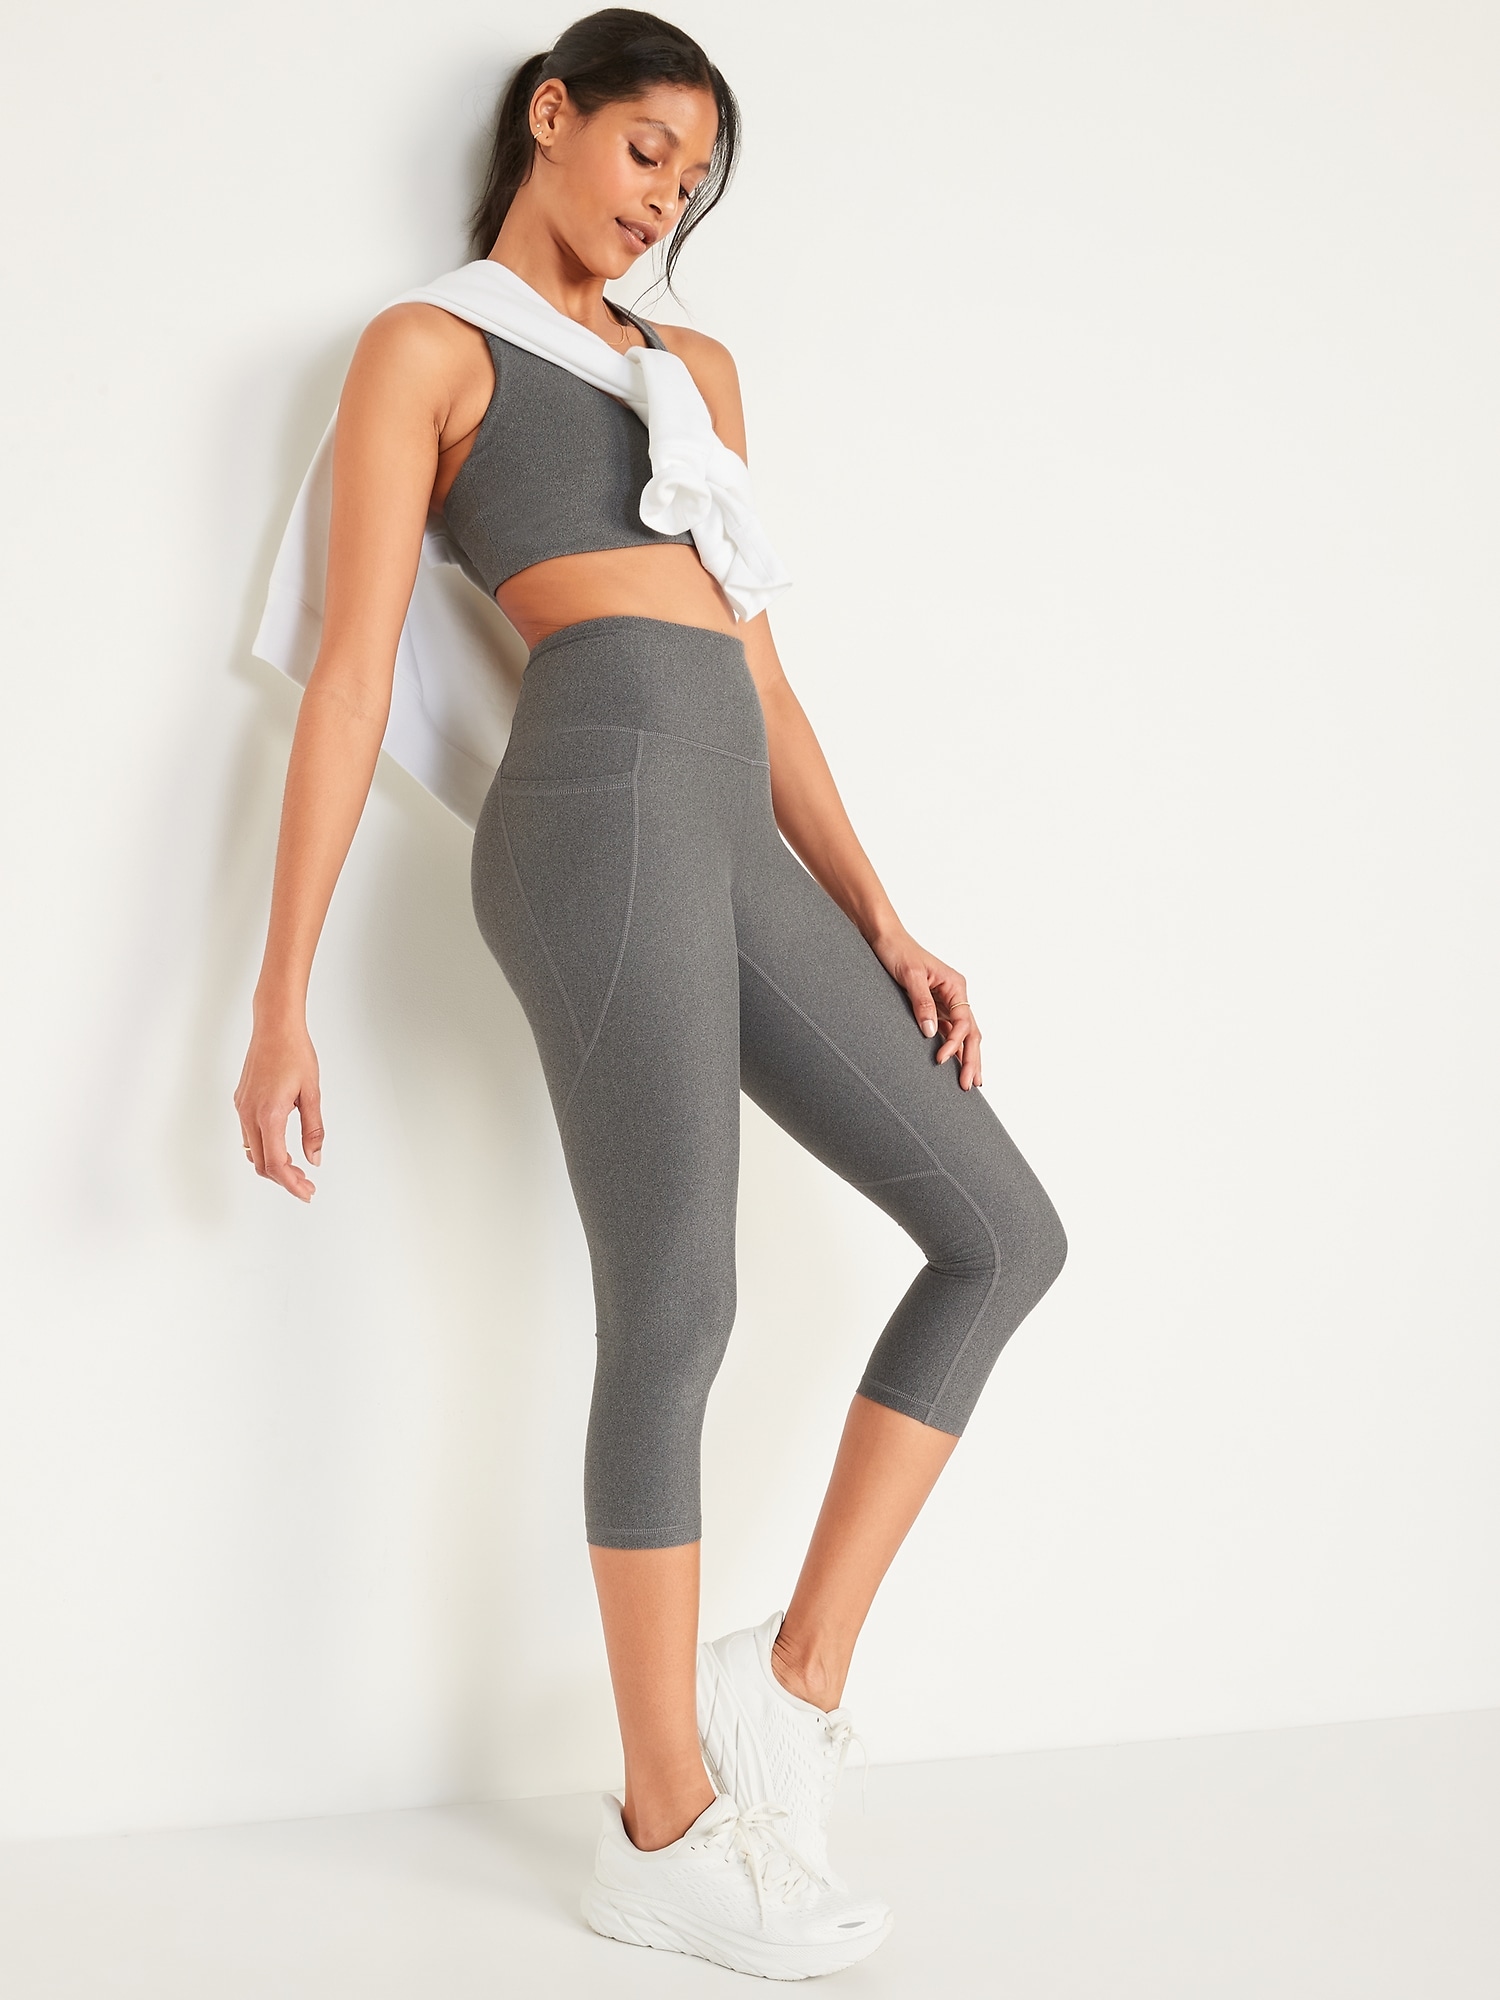 High-Waisted PowerSoft Crop Leggings for Women, Old Navy